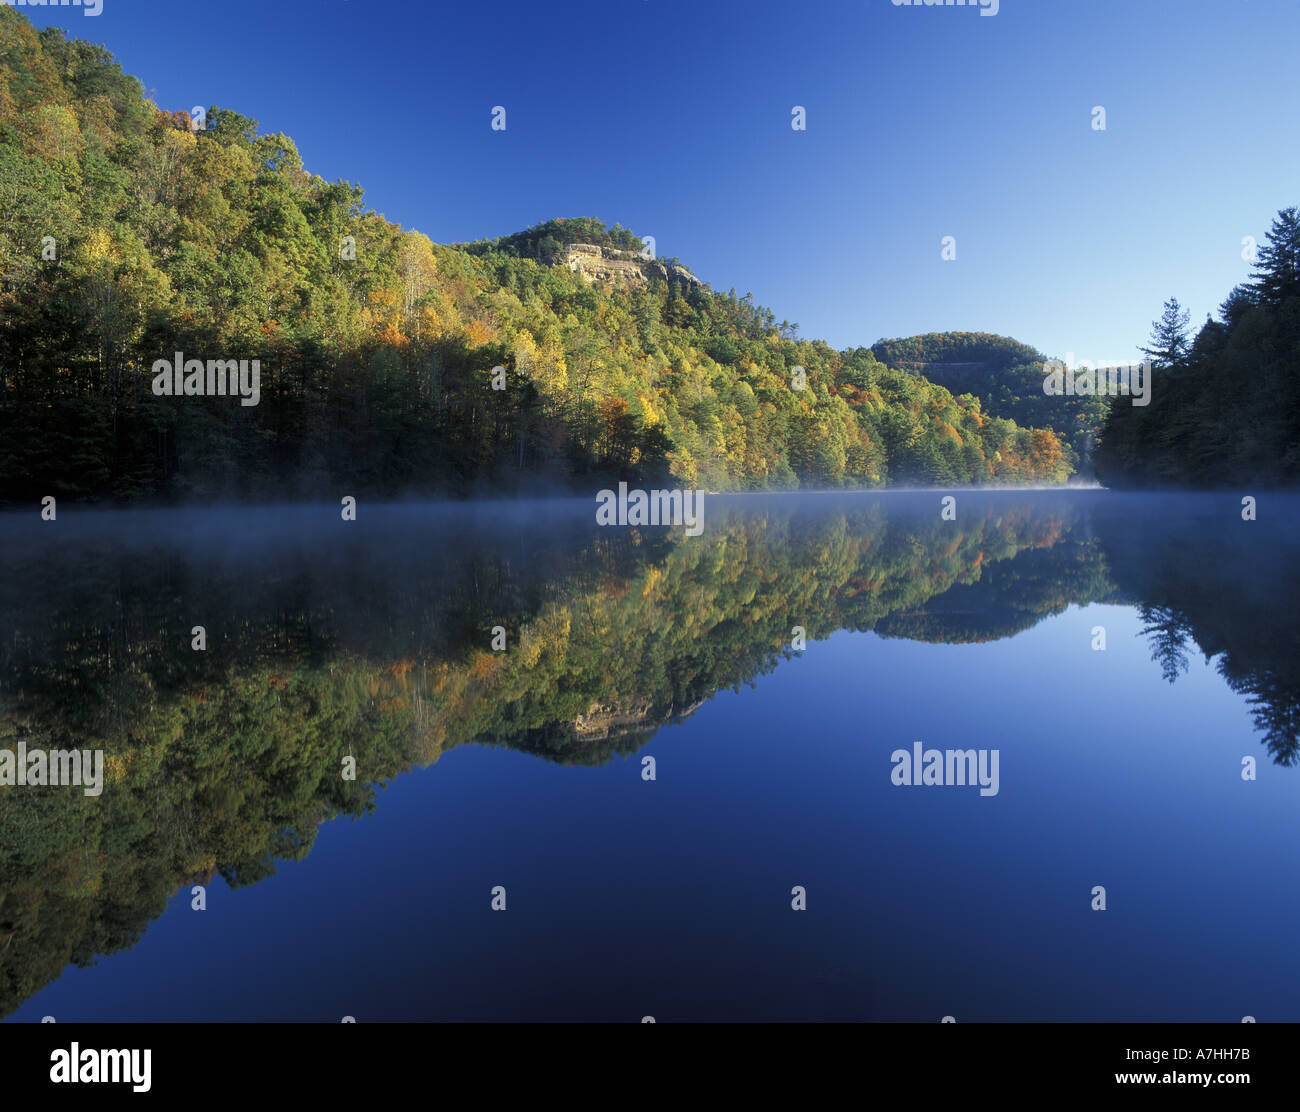 N.A., USA, Kentucky. Daniel Boone National Forest, Natural Bridge State Park. Autumn colors mirrored on Millcreek Lake Stock Photo